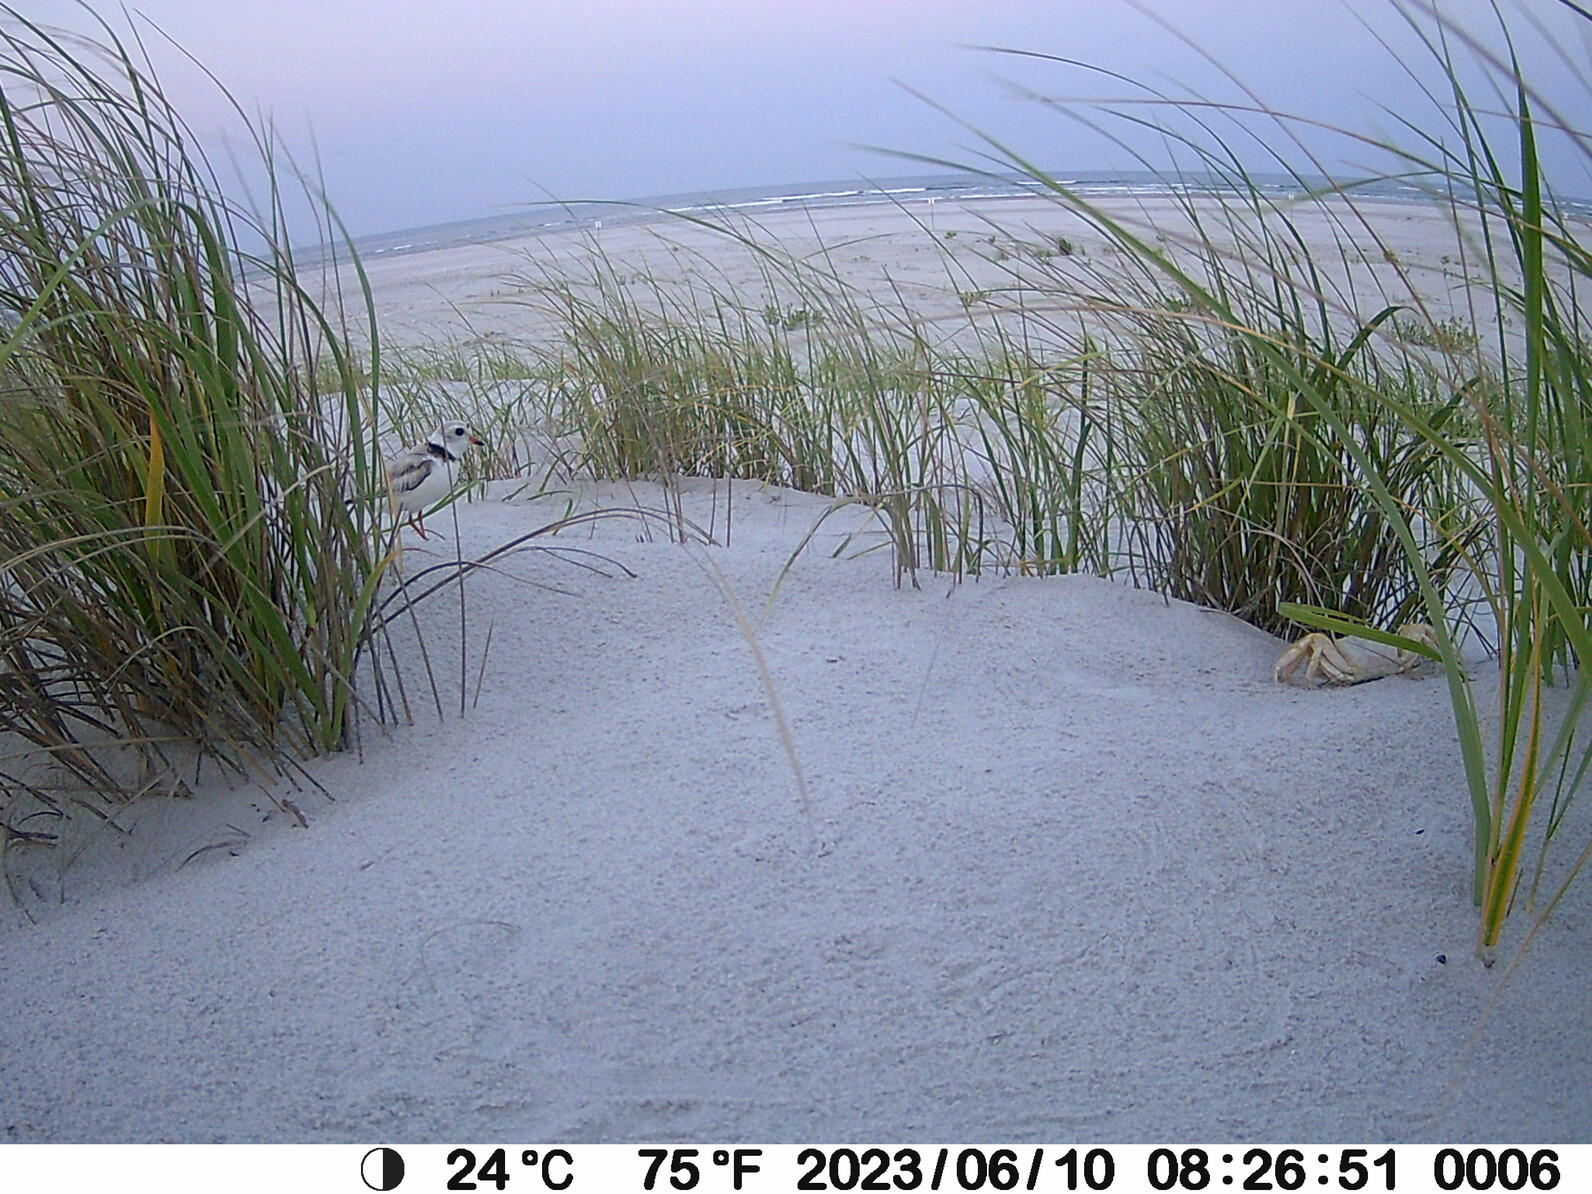 Ghost crab creeping up on the Piping Plover nest